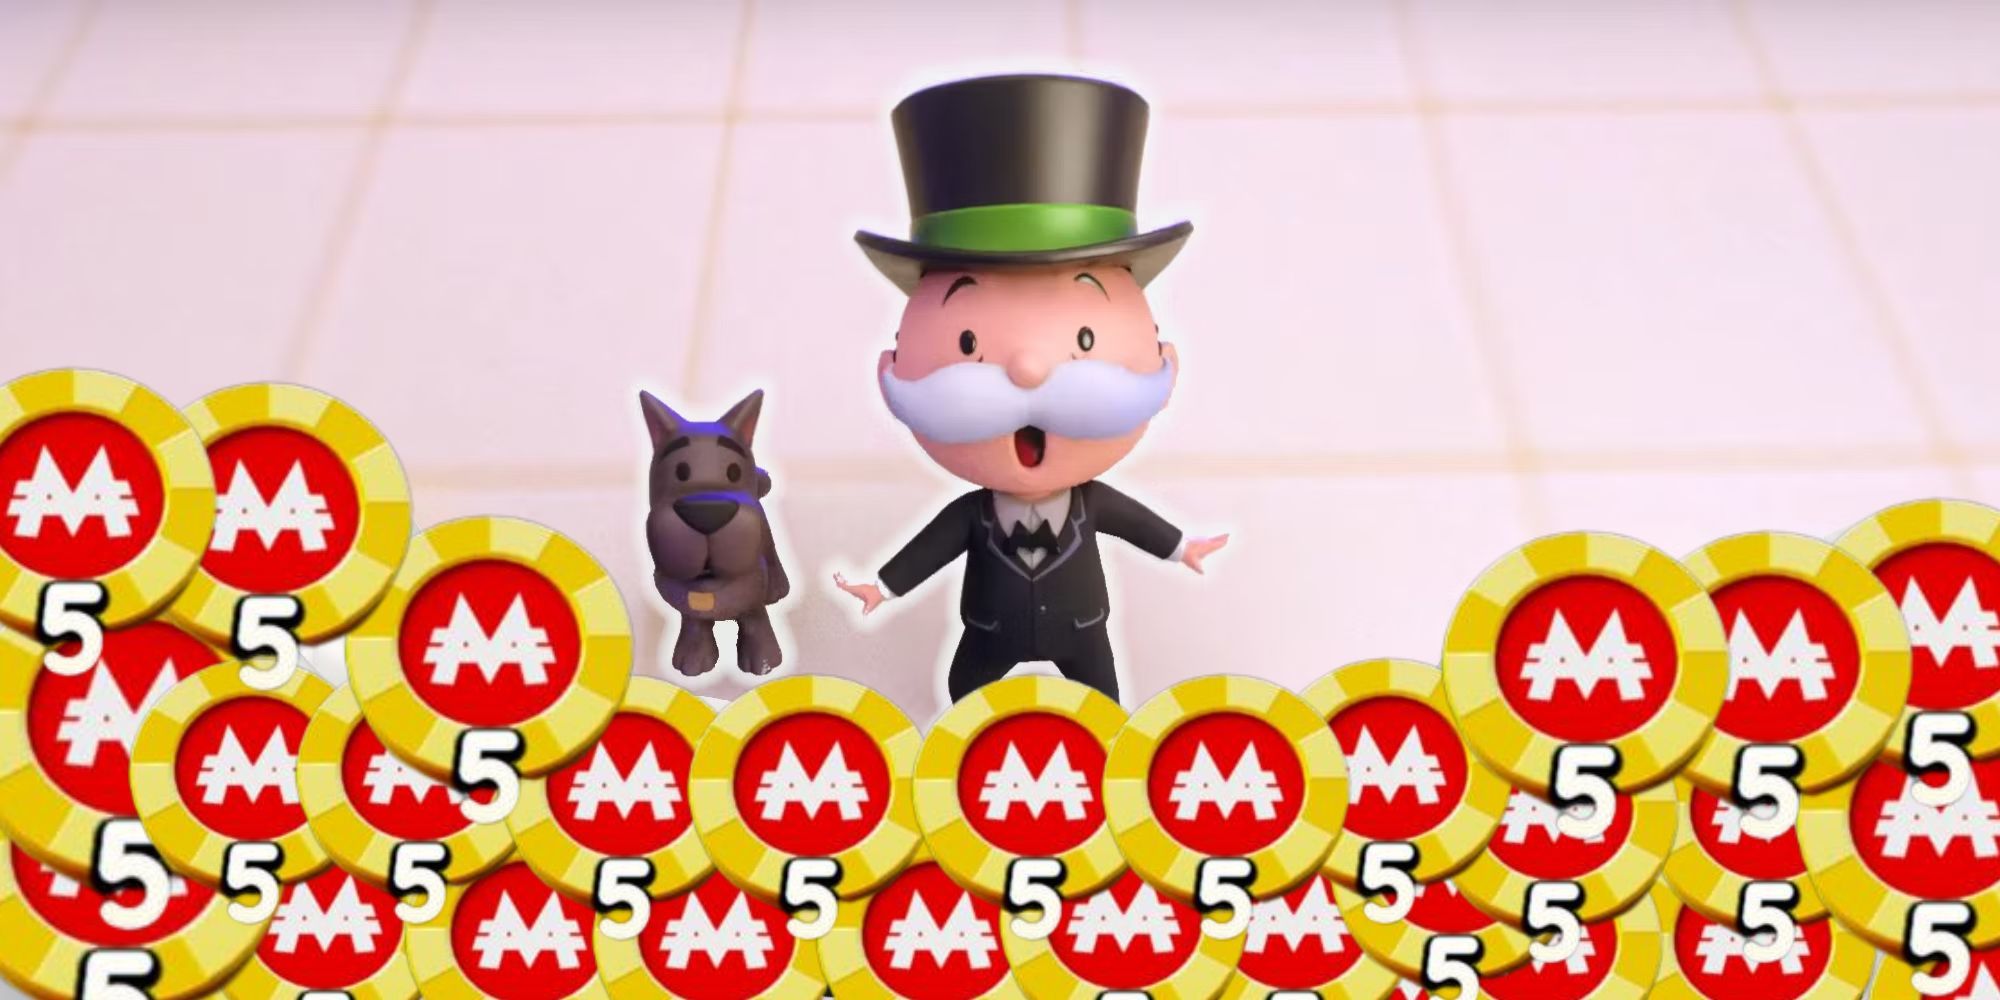 Monopoly Go, Mr. Monopoly and his dog surrounded by Peg-E tokens